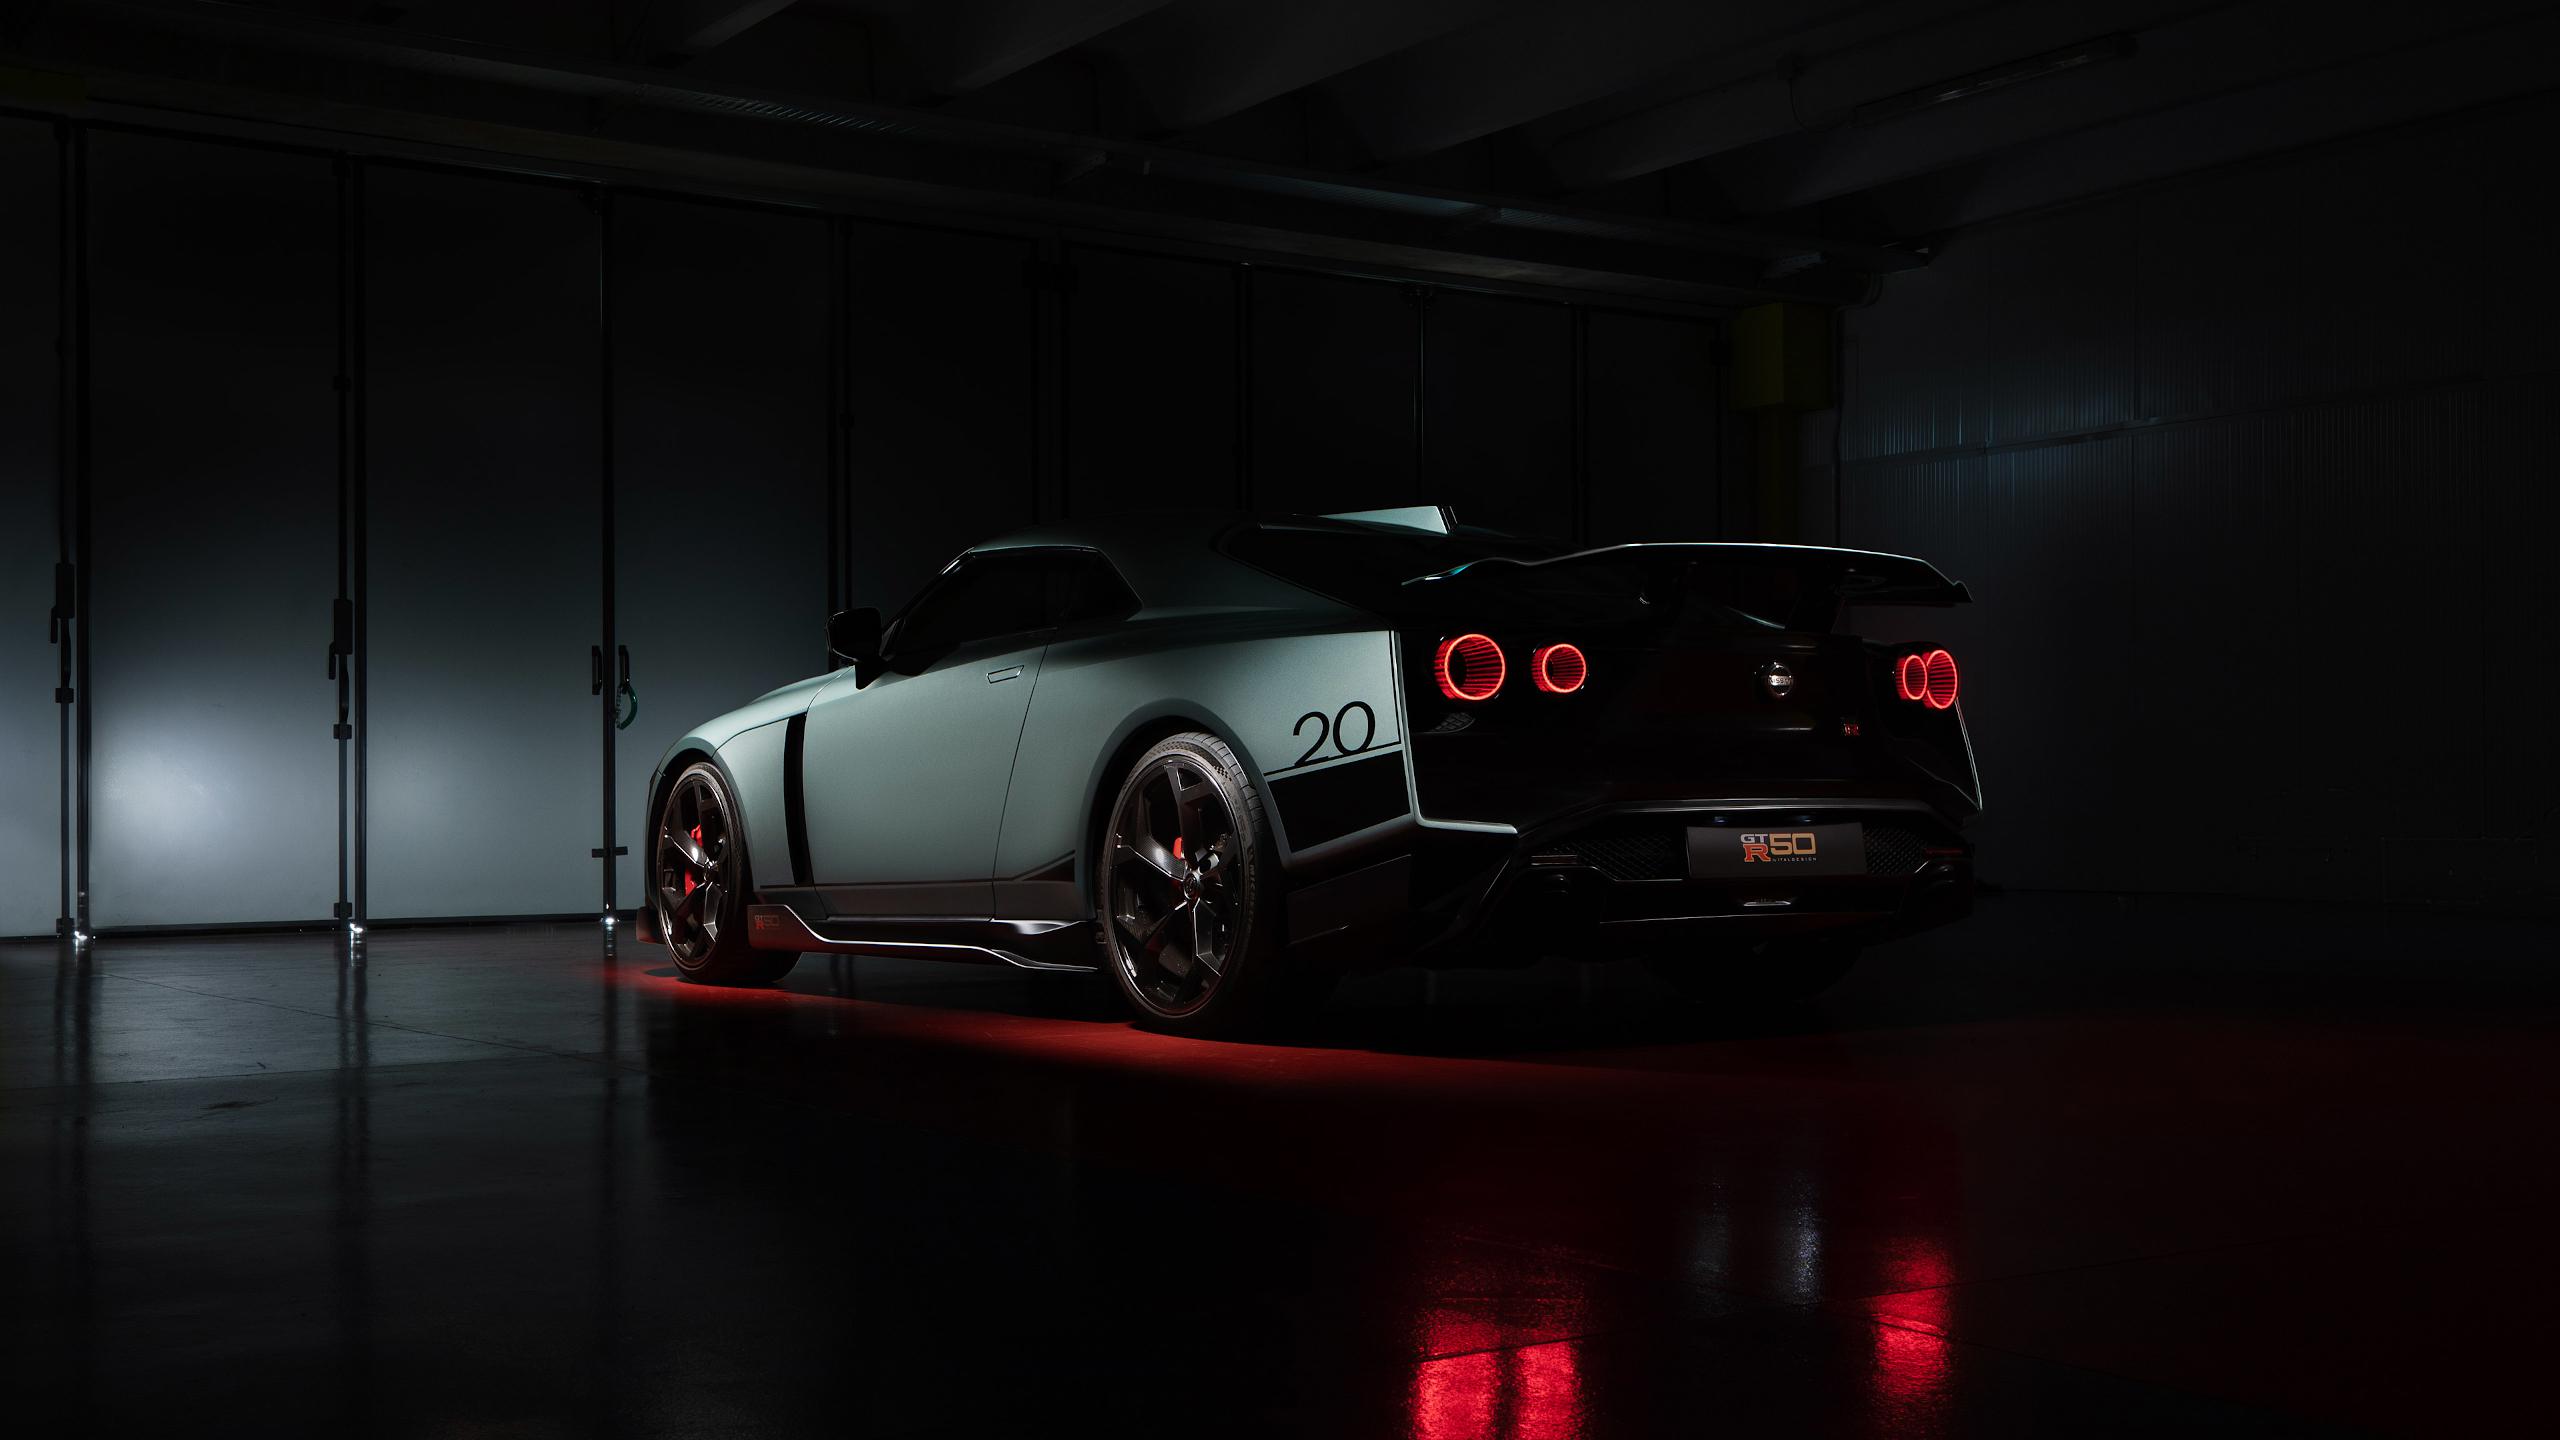 Nissan GTR Wallpapers (73+ images)